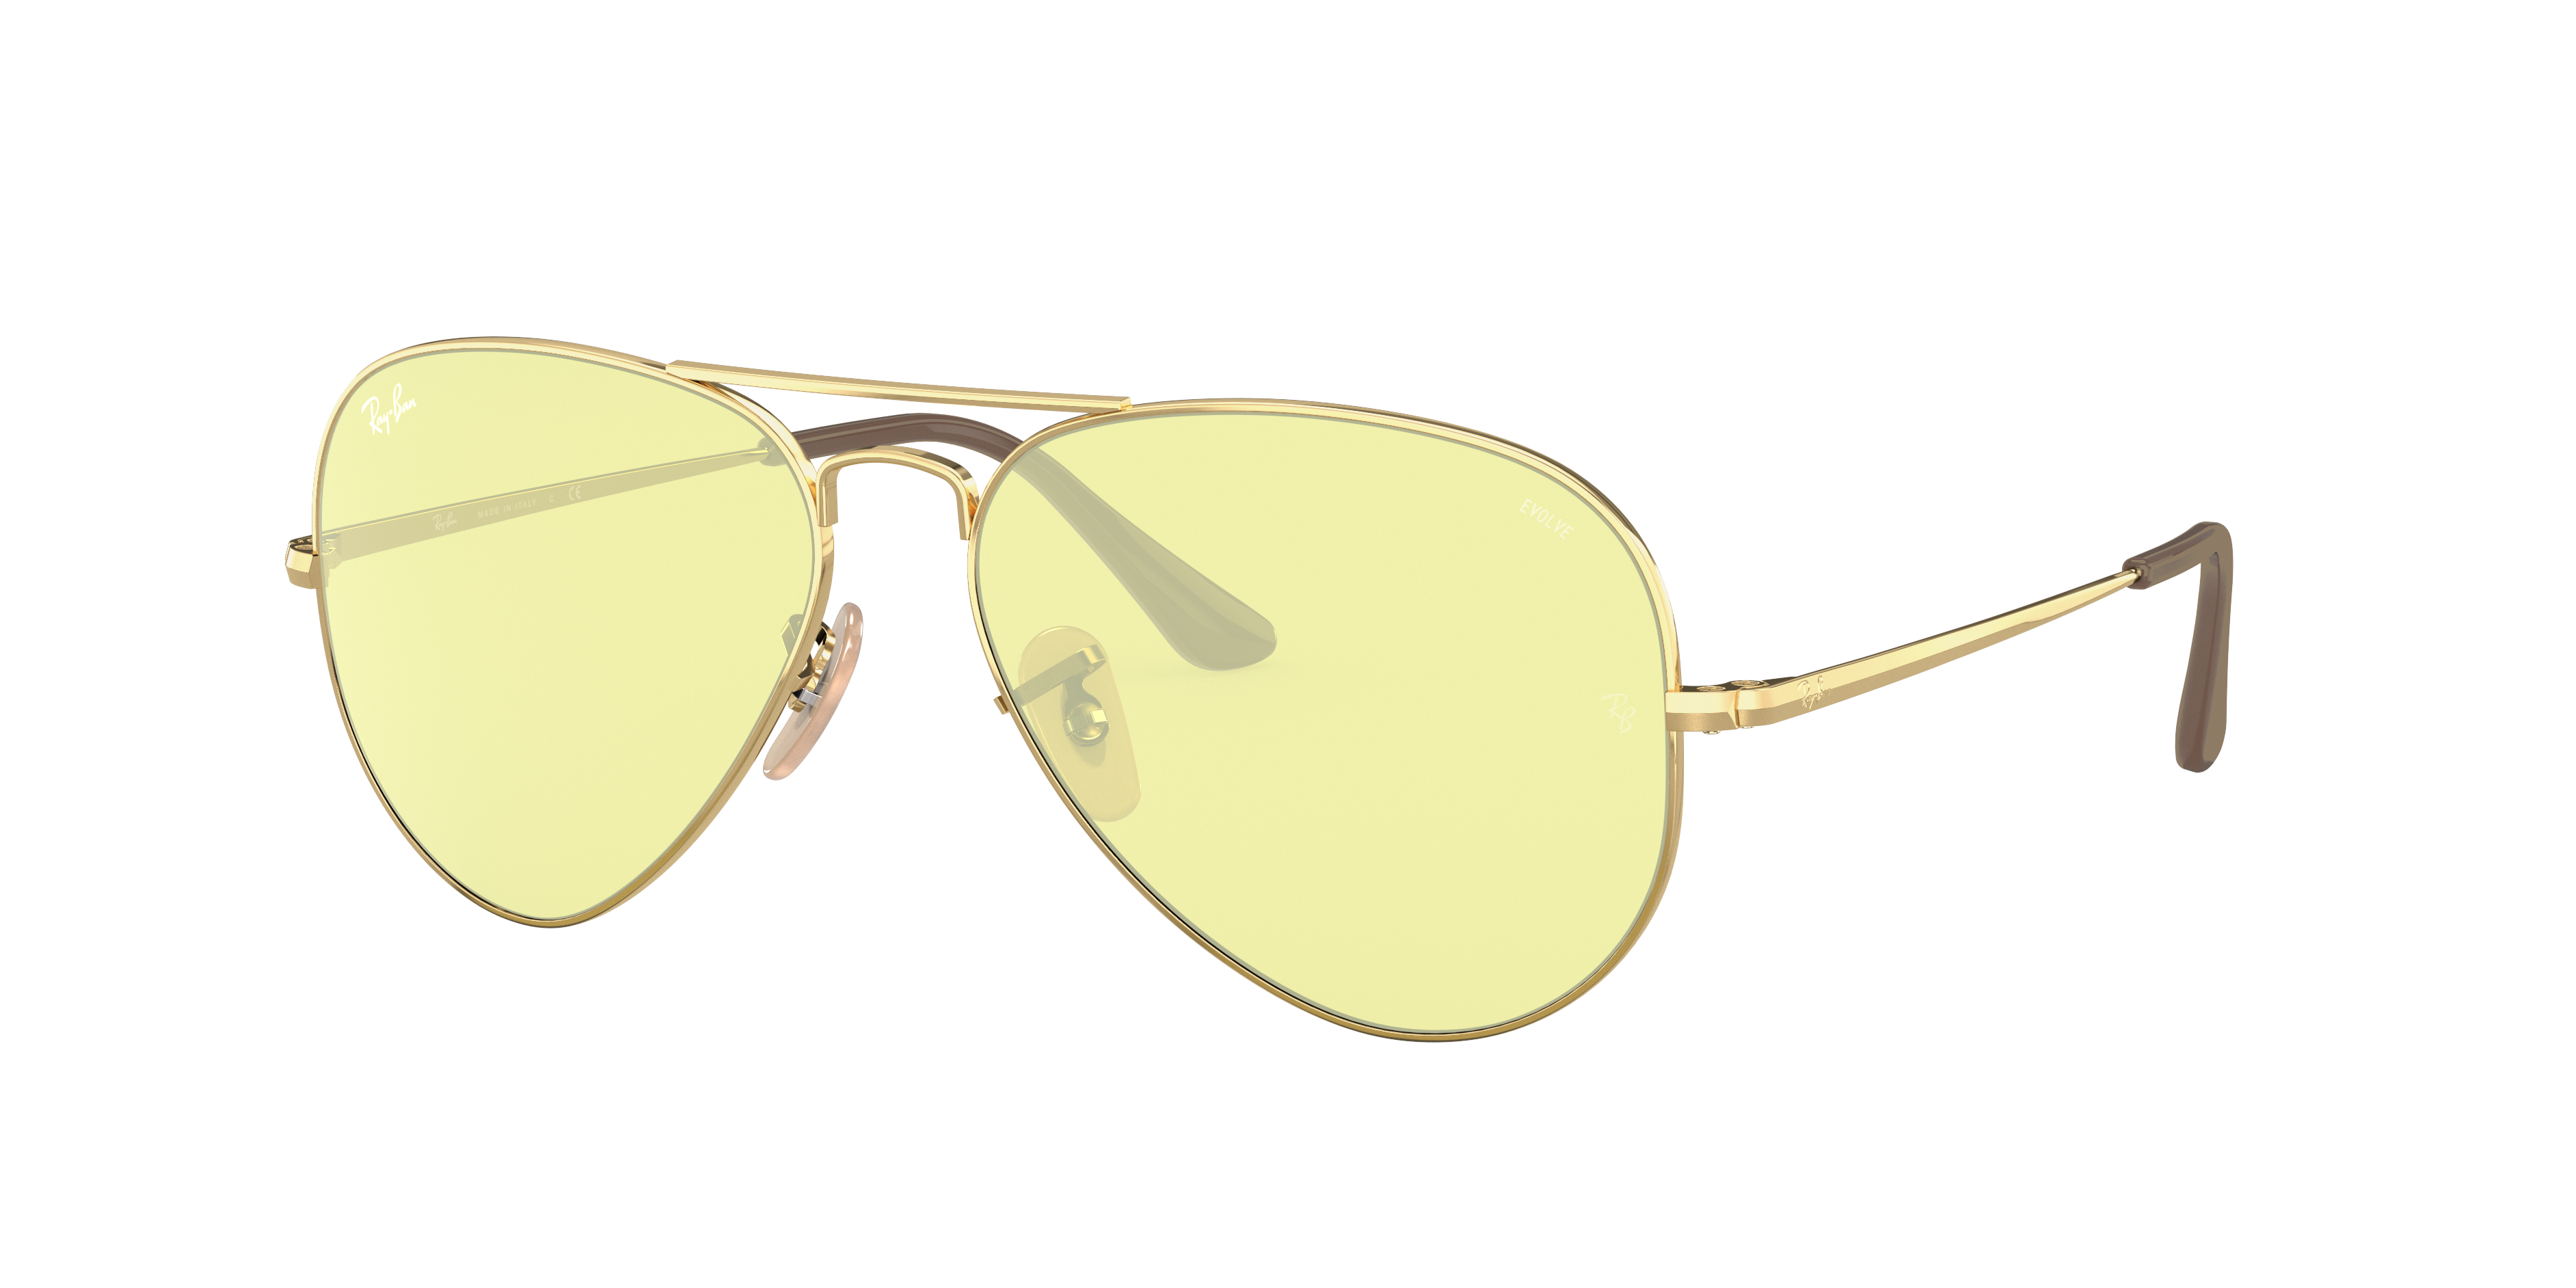 Rb36 Solid Evolve Sunglasses In Gold And Yellow Light Red Ray Ban